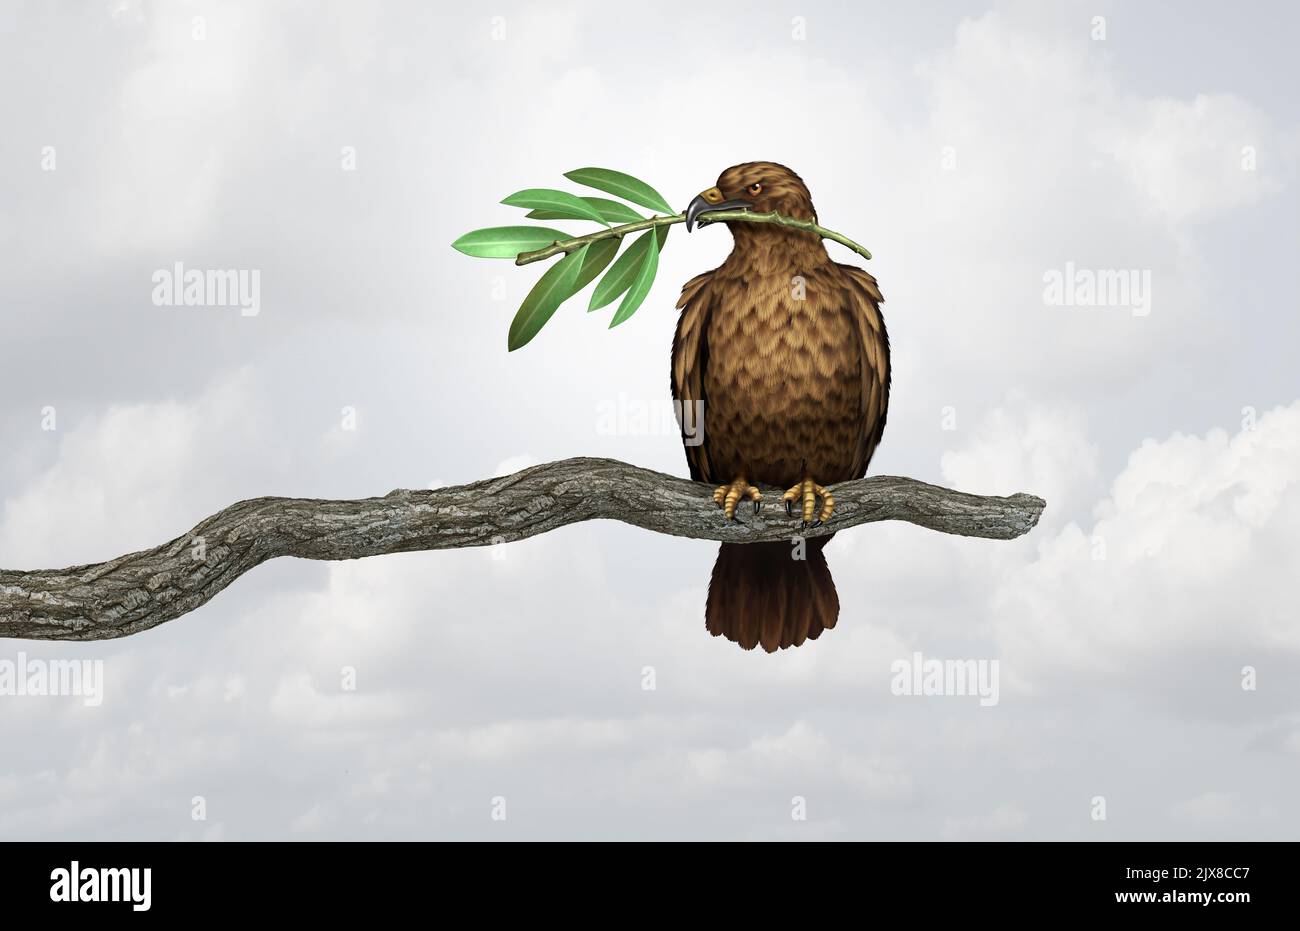 Peace through strength foreign policy concept represents military power as a powerful and strong war hawk holding an olive branch for freedom. Stock Photo